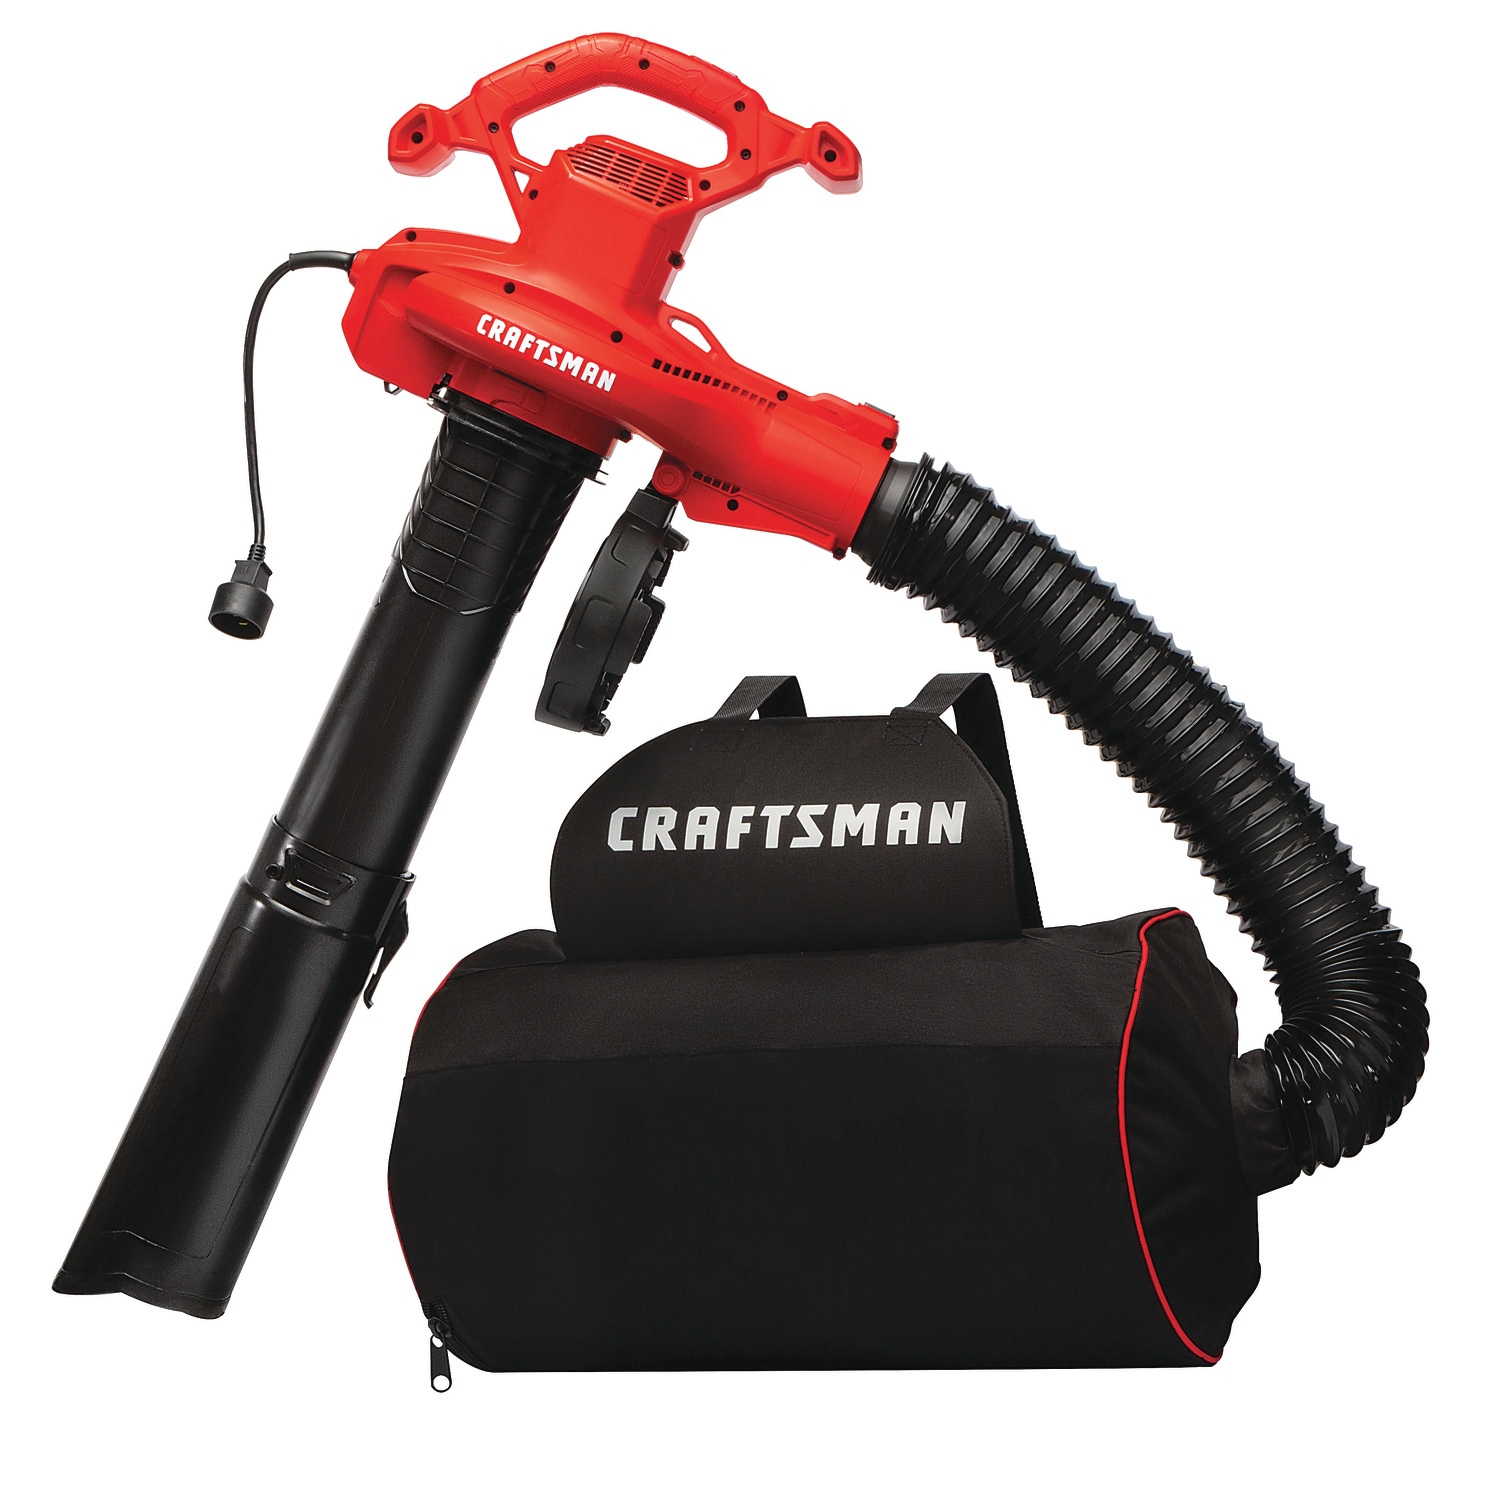 Double Battery Lawn Leaf Blower Vacuum Cleaner with Bag 36V